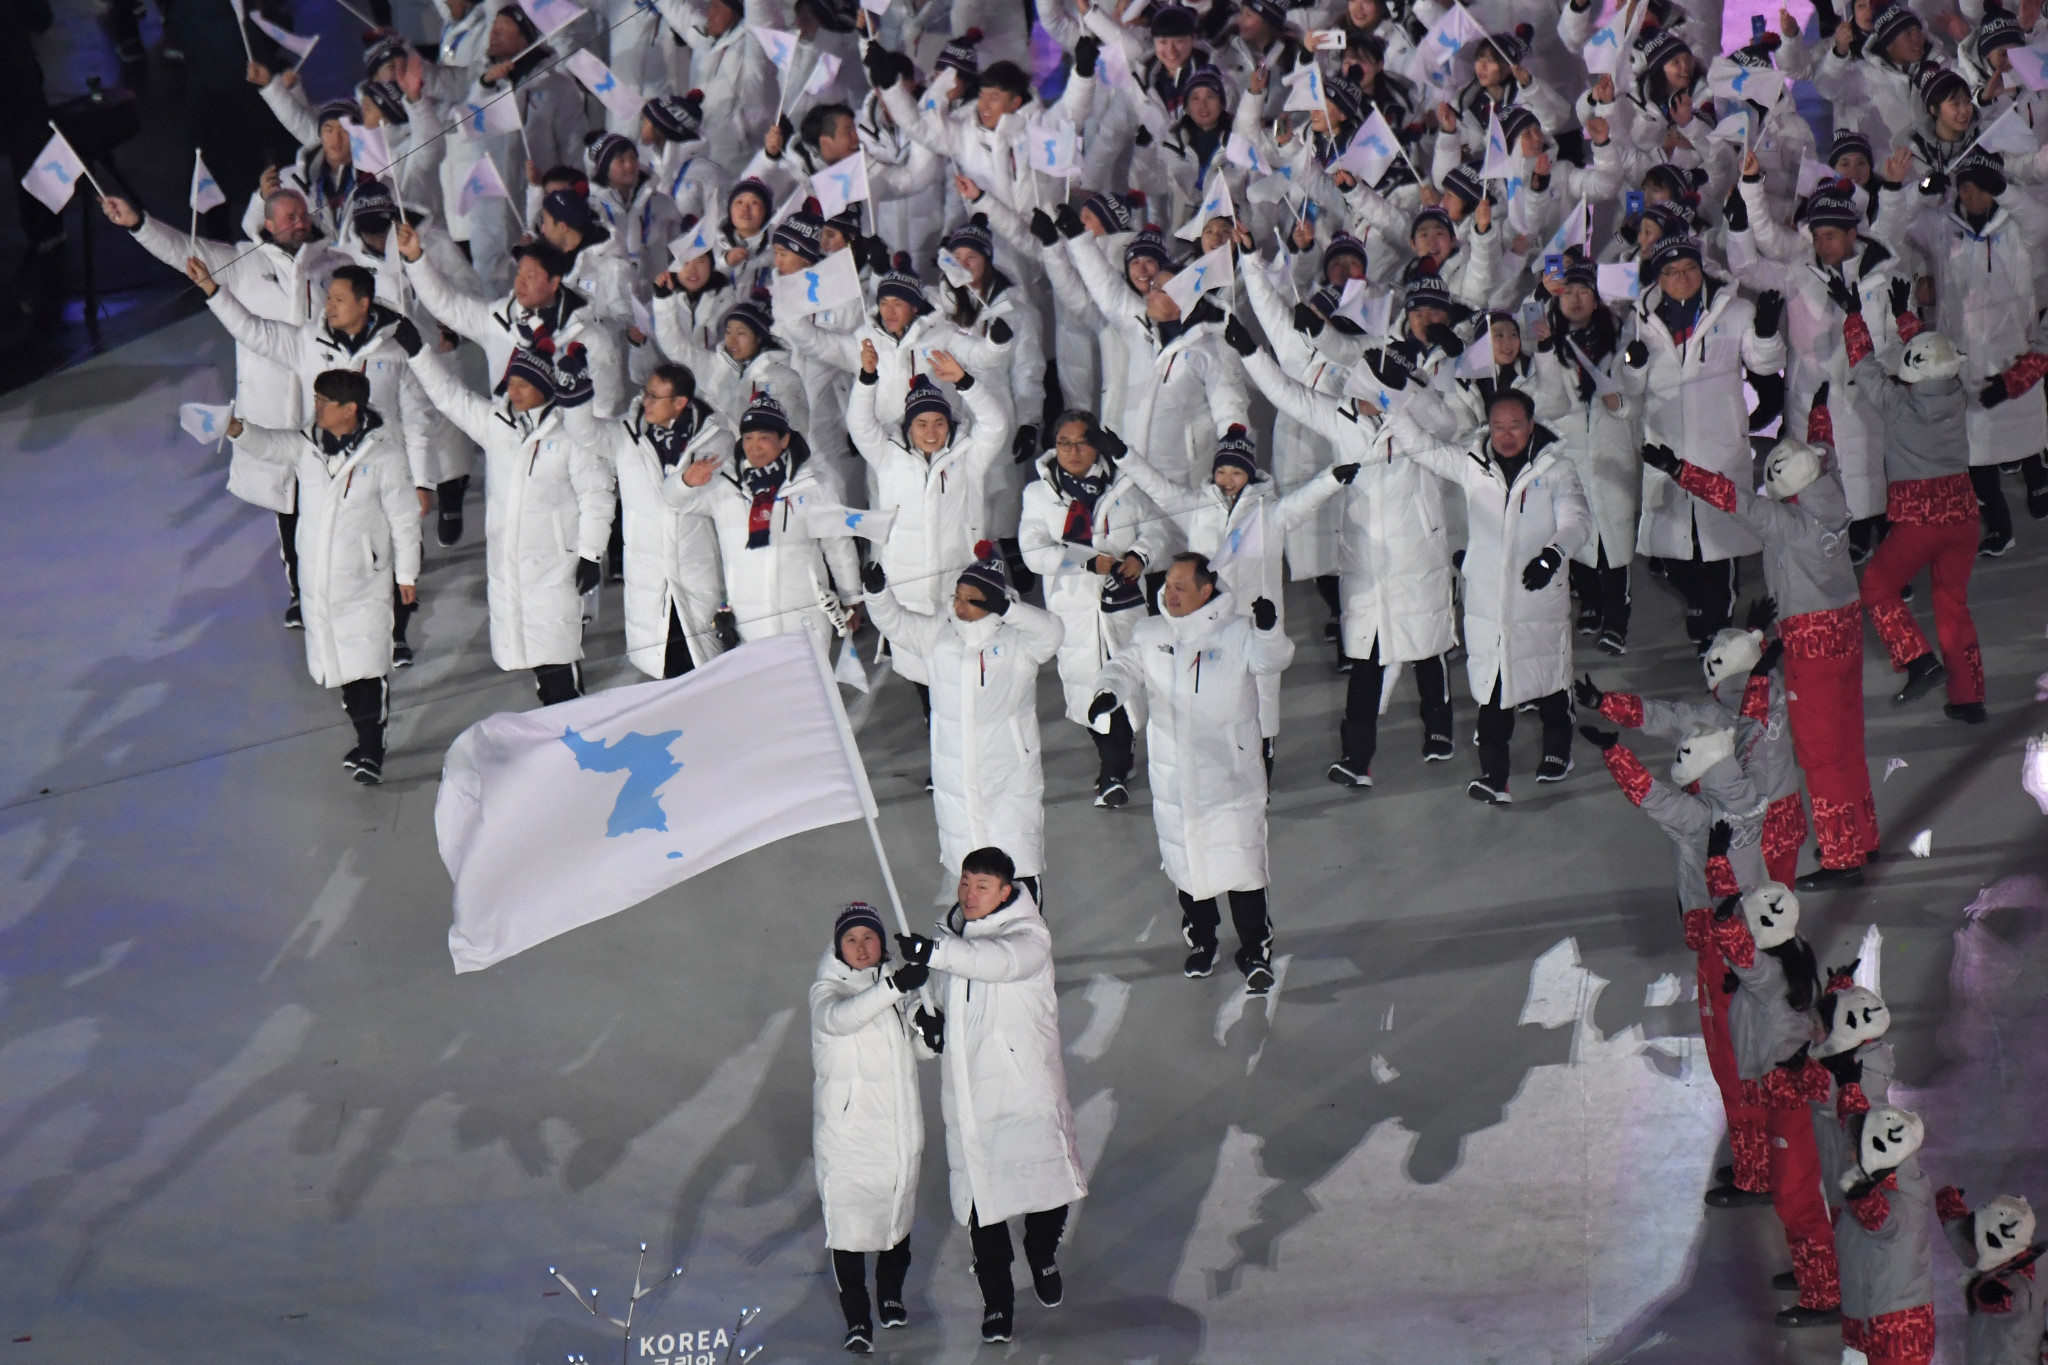 North and South Korea walked under a united flag at the Opening Ceremony of the Pyeongchang 2018 Winter Olympics ©Getty Images